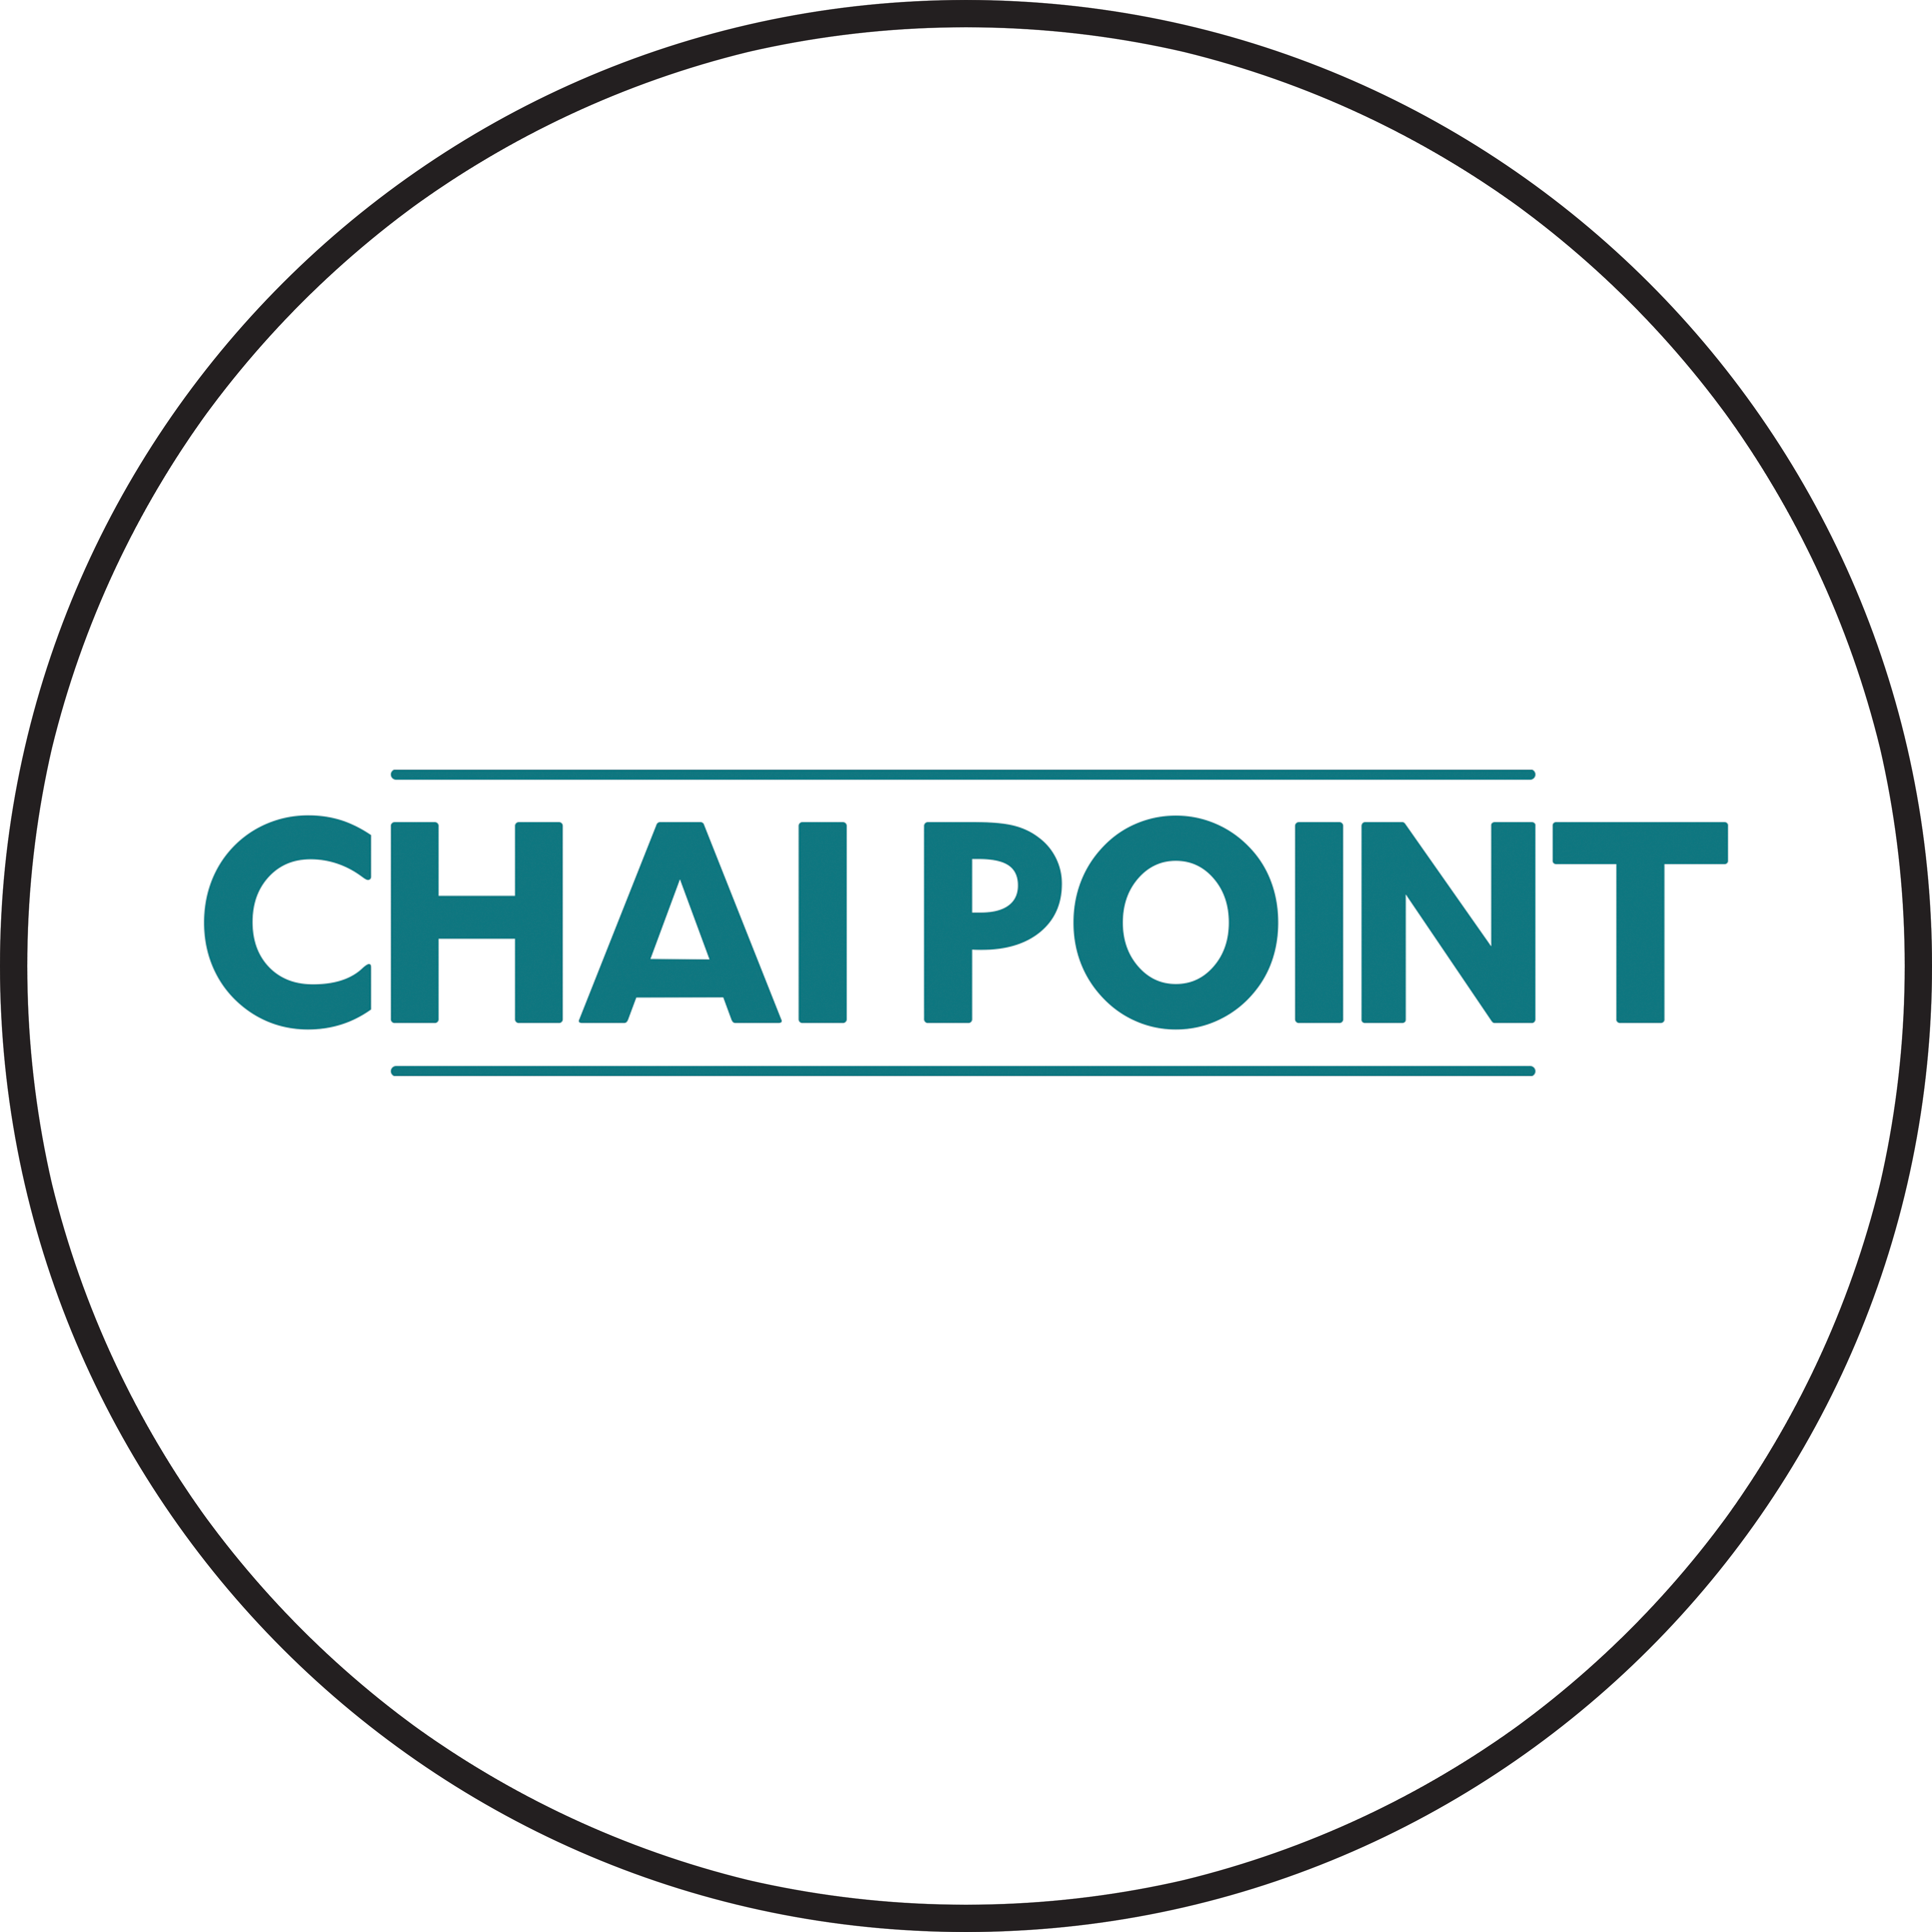 Image of Chai Point.-OF117795-Picxy